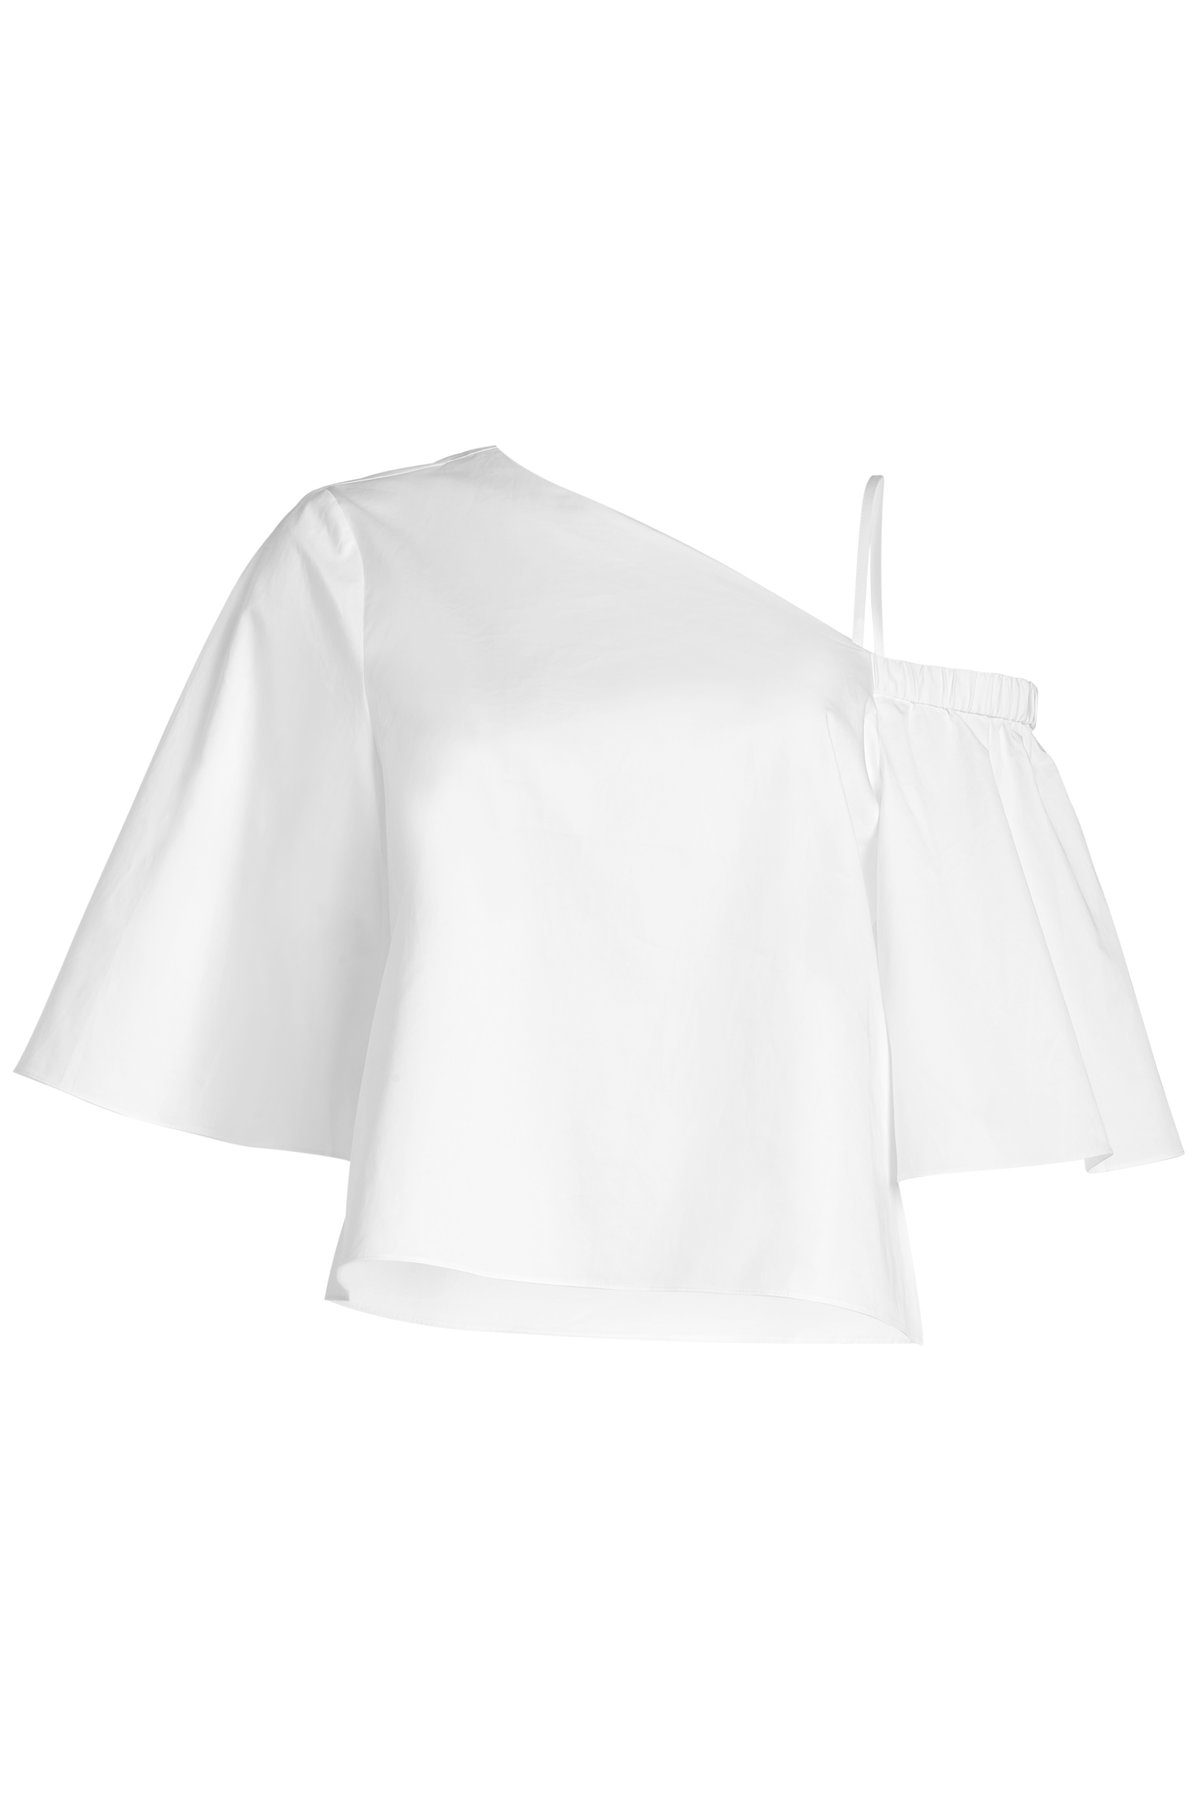 Cotton One-Shoulder Top by Tibi